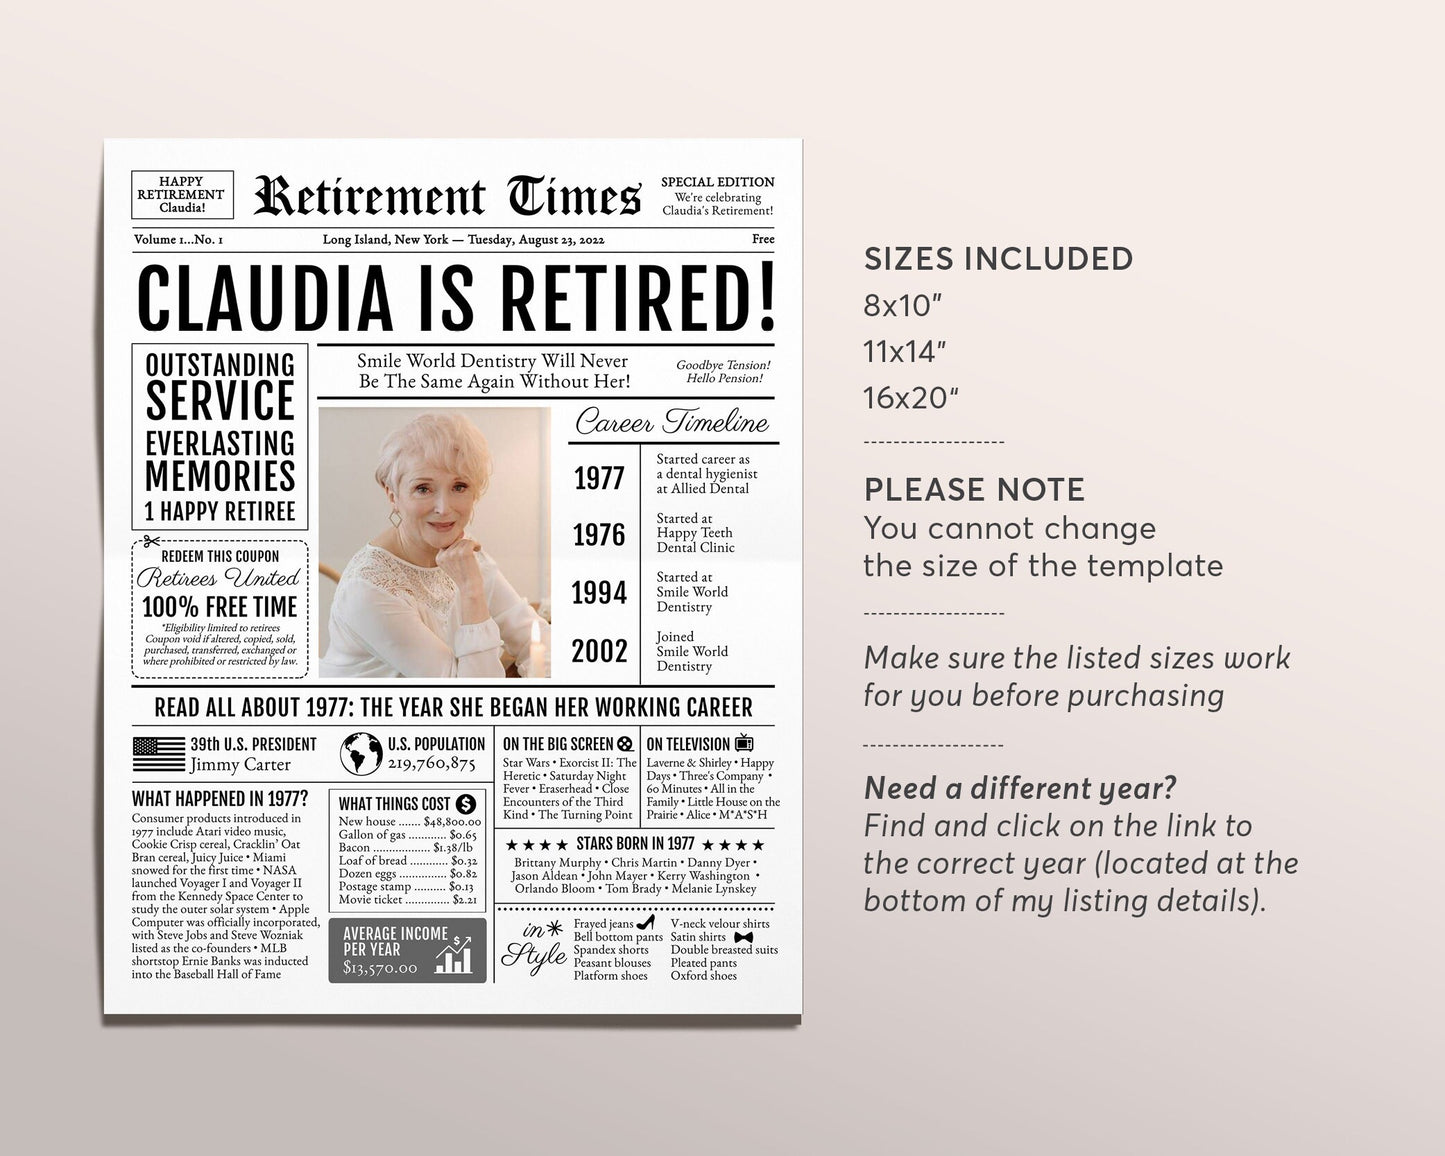 Personalized Retirement Gift for Nurse, Retirement Gifts For Nurse Practitioner, Retirement Sign for Nurse, Newspaper Back in 1977